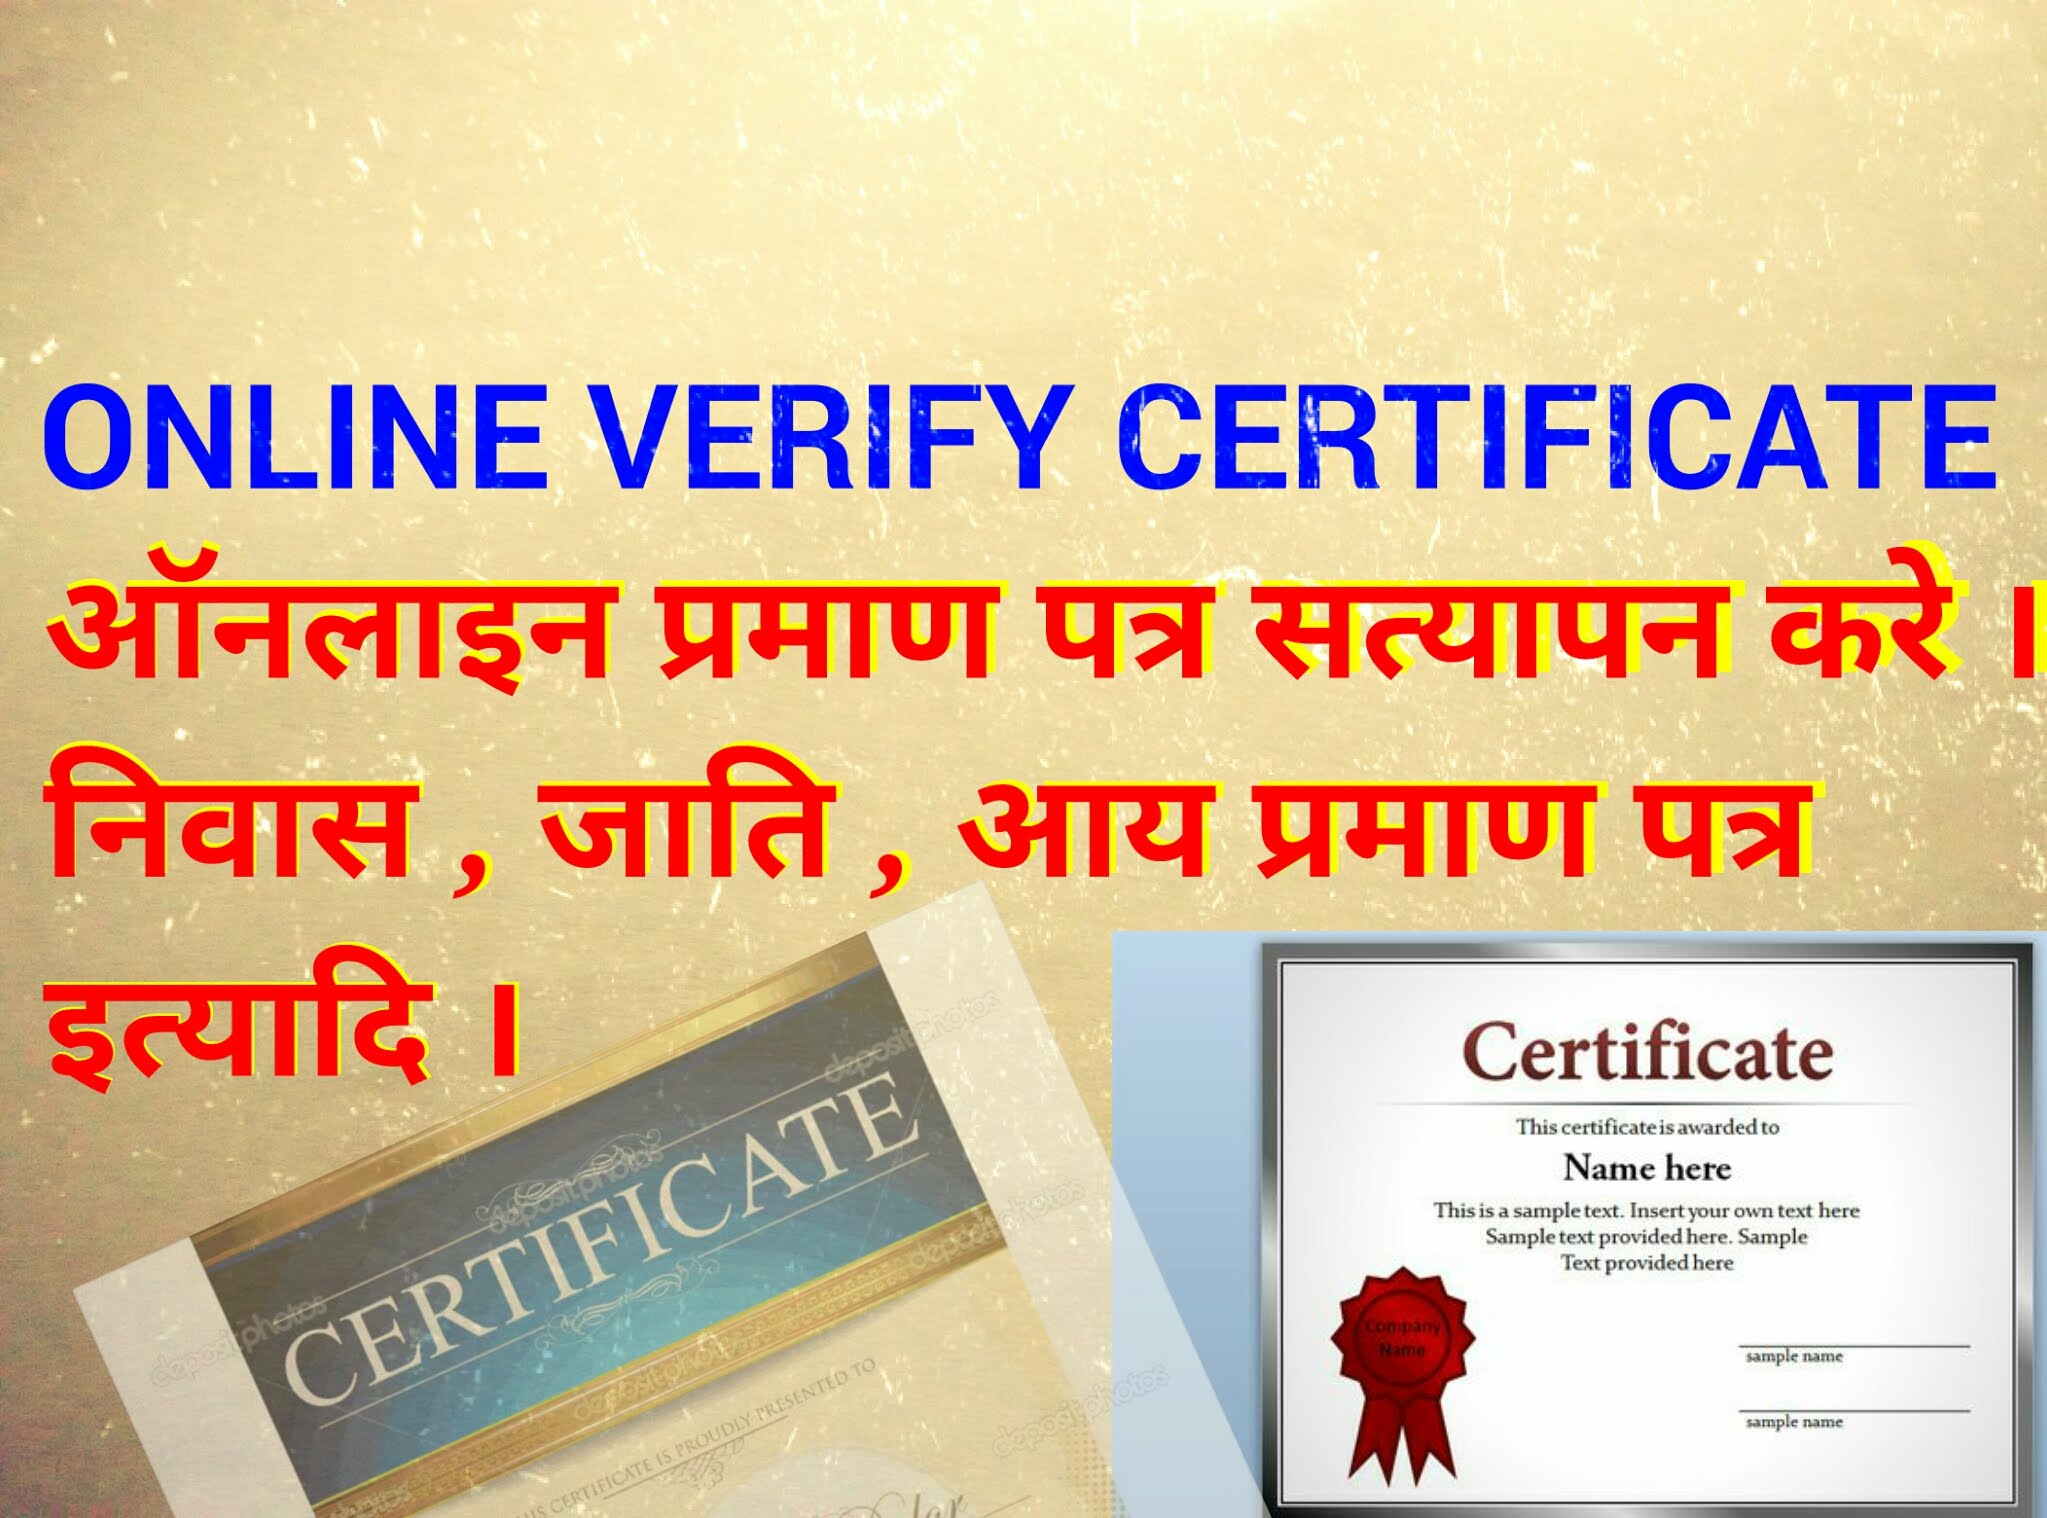 online verify certificate (Part 1) YouTube